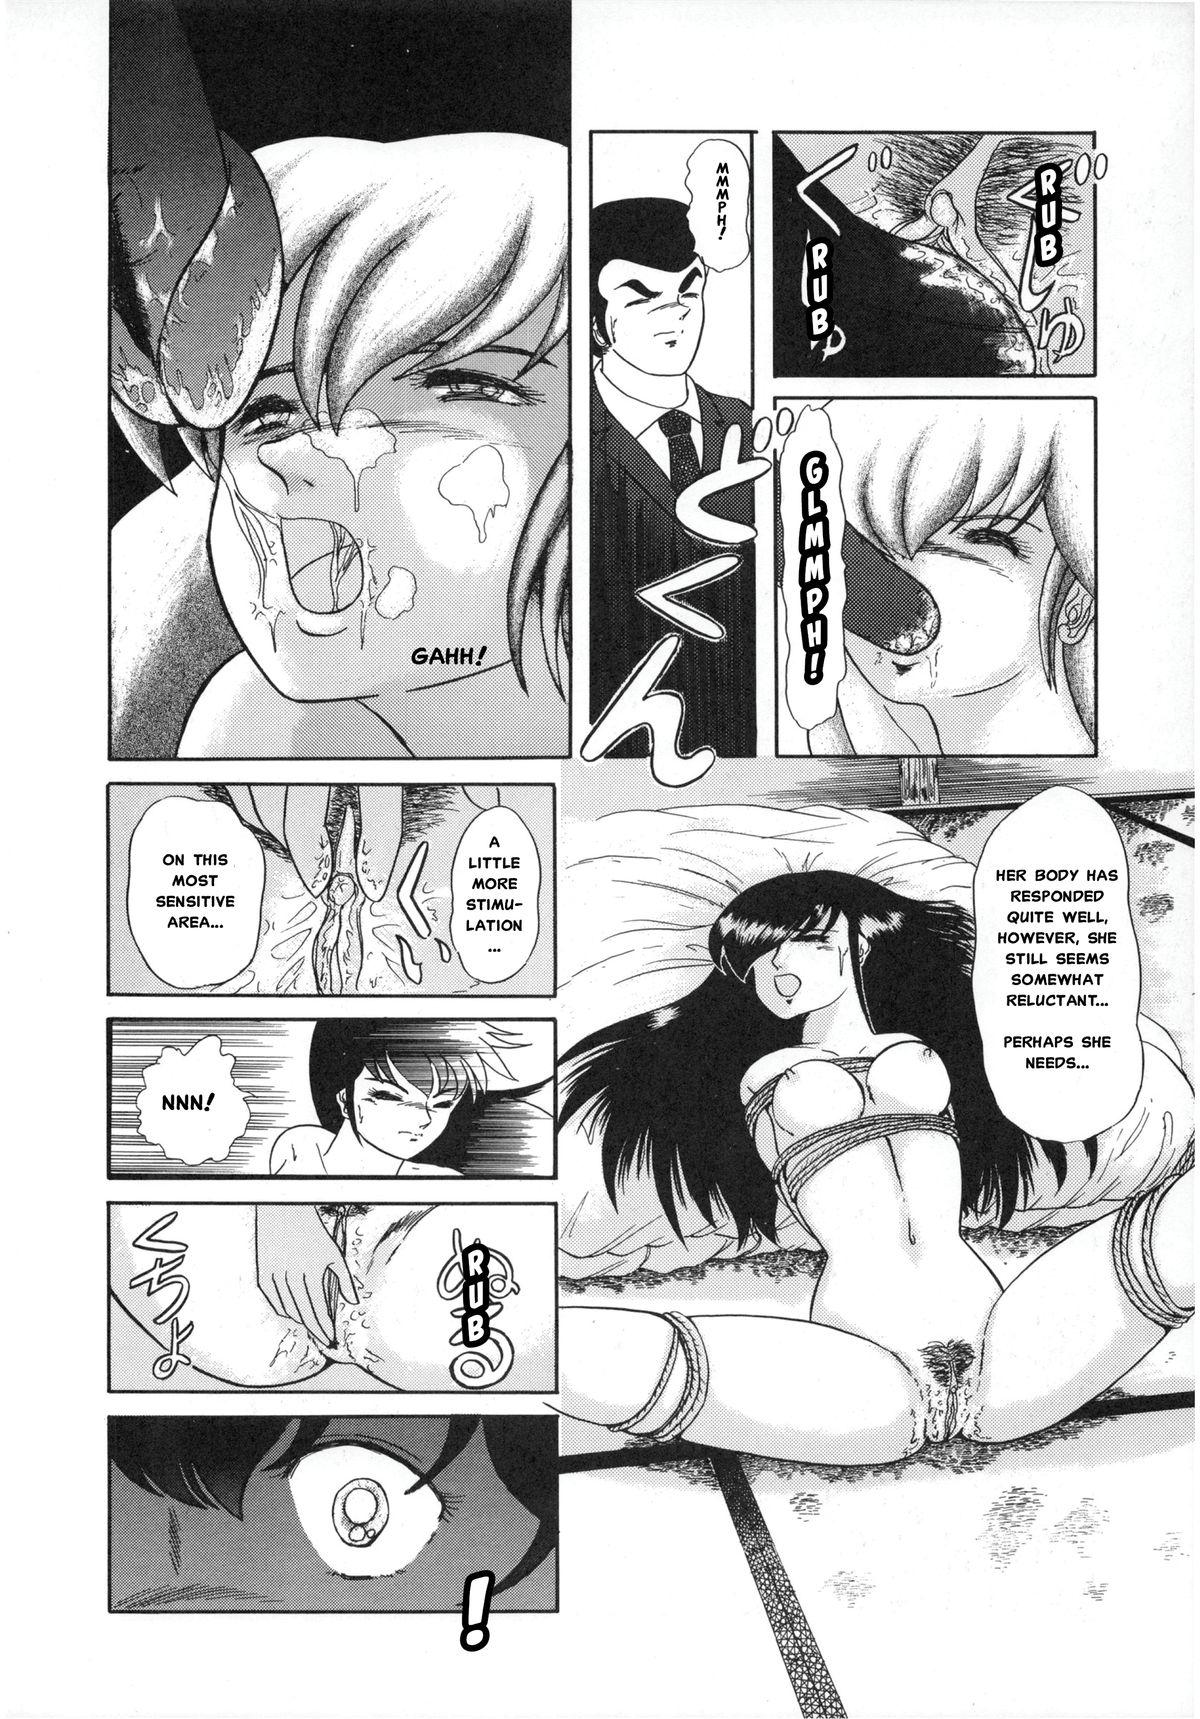 Sex Party Behind The Scenes At Ikkoku-kan - Maison ikkoku Caught - Page 6